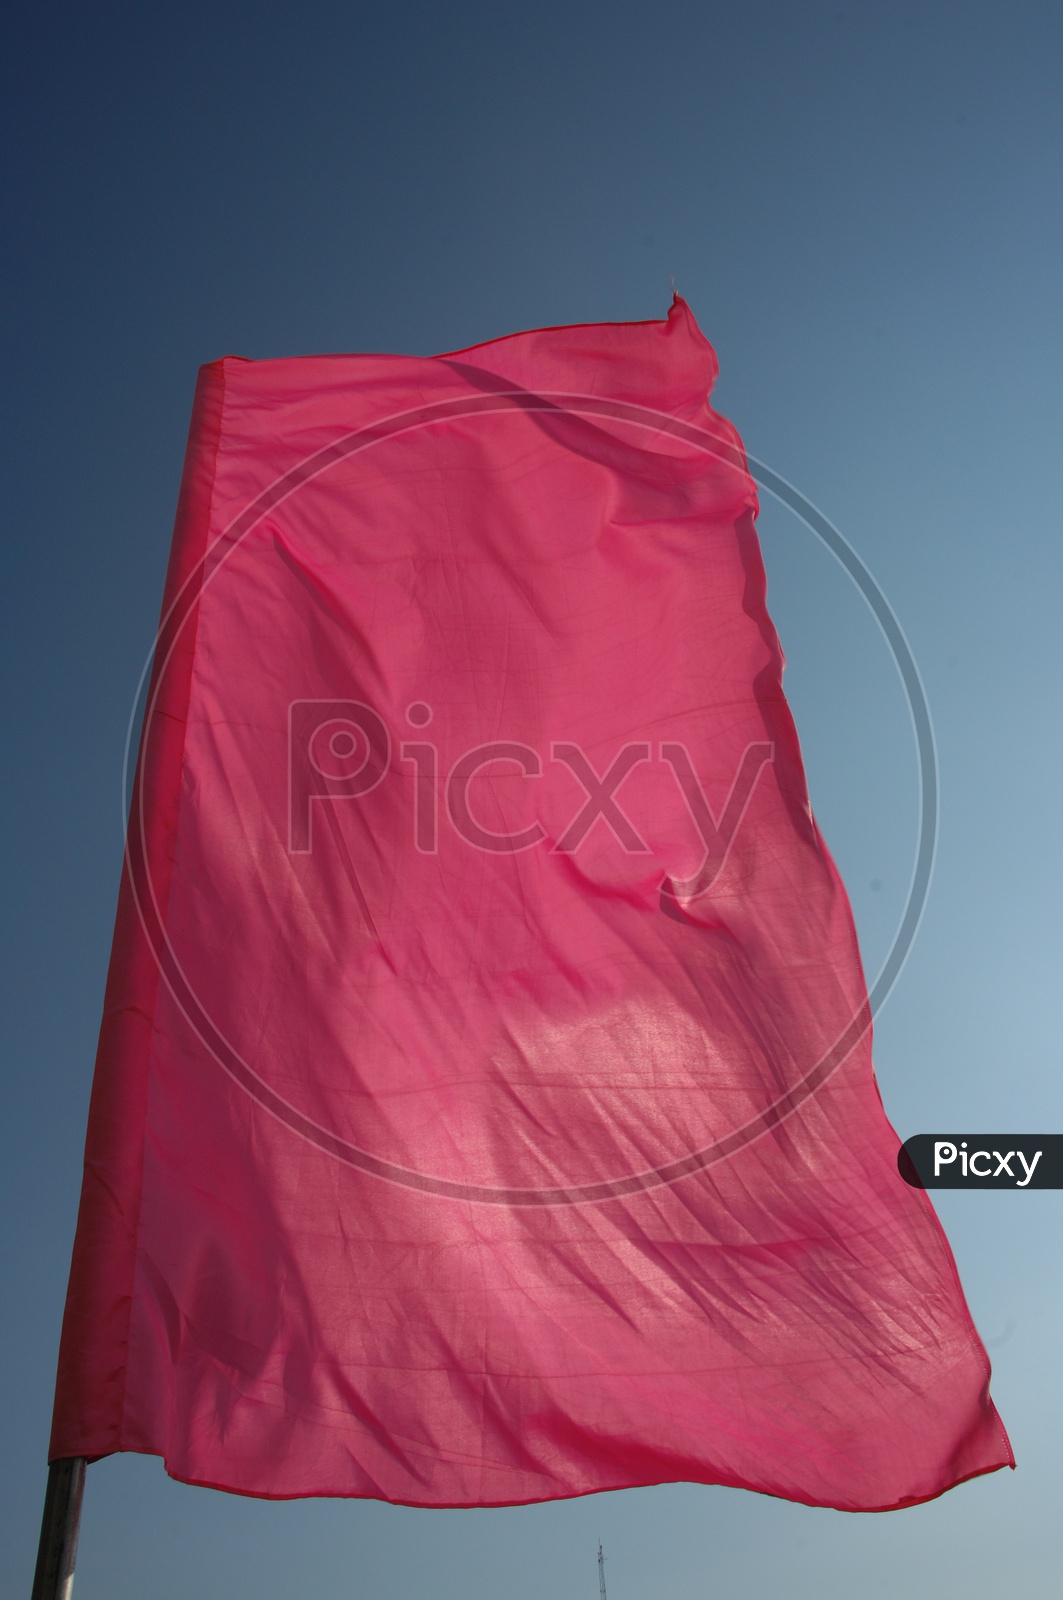 Pink curtain flag waving in the daylight with blue sky